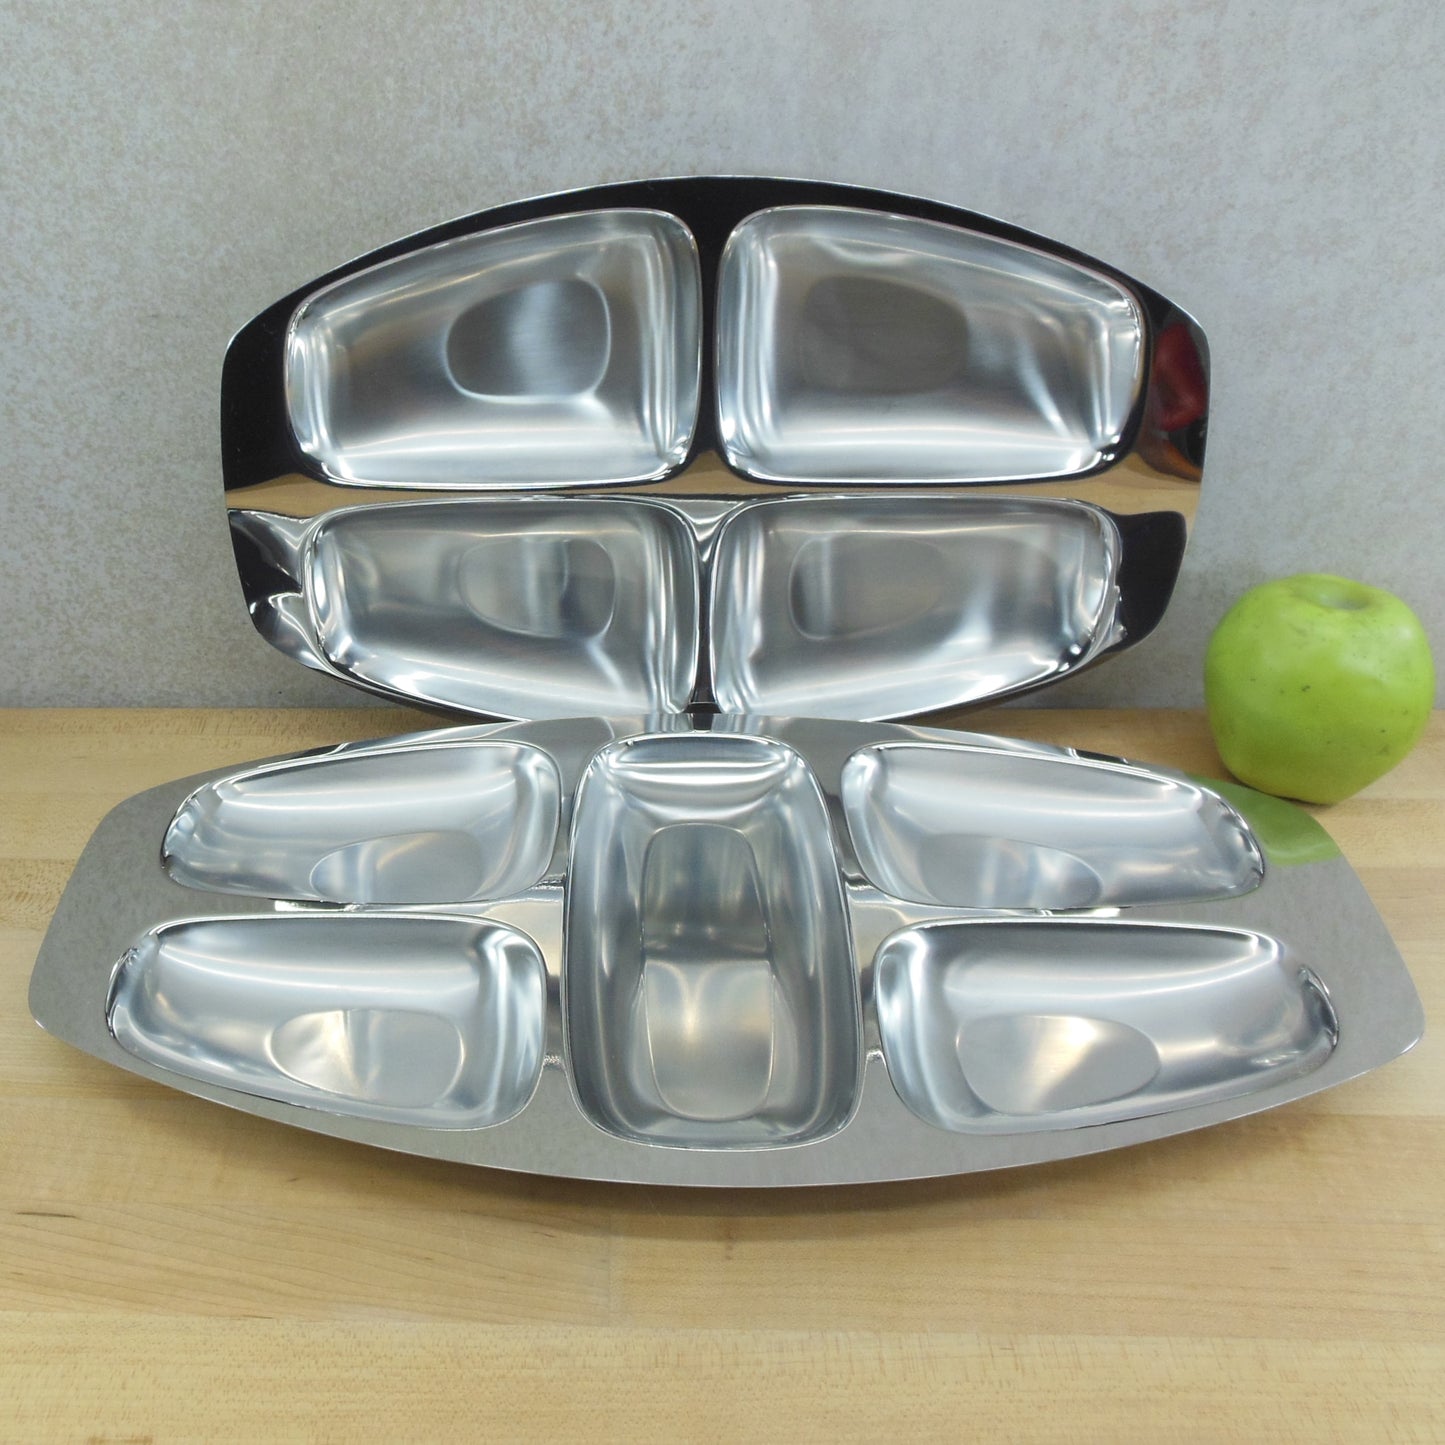 Alessi Italy Inox 18-10 Stainless Divided Serving Trays 4 & 5 Compartment